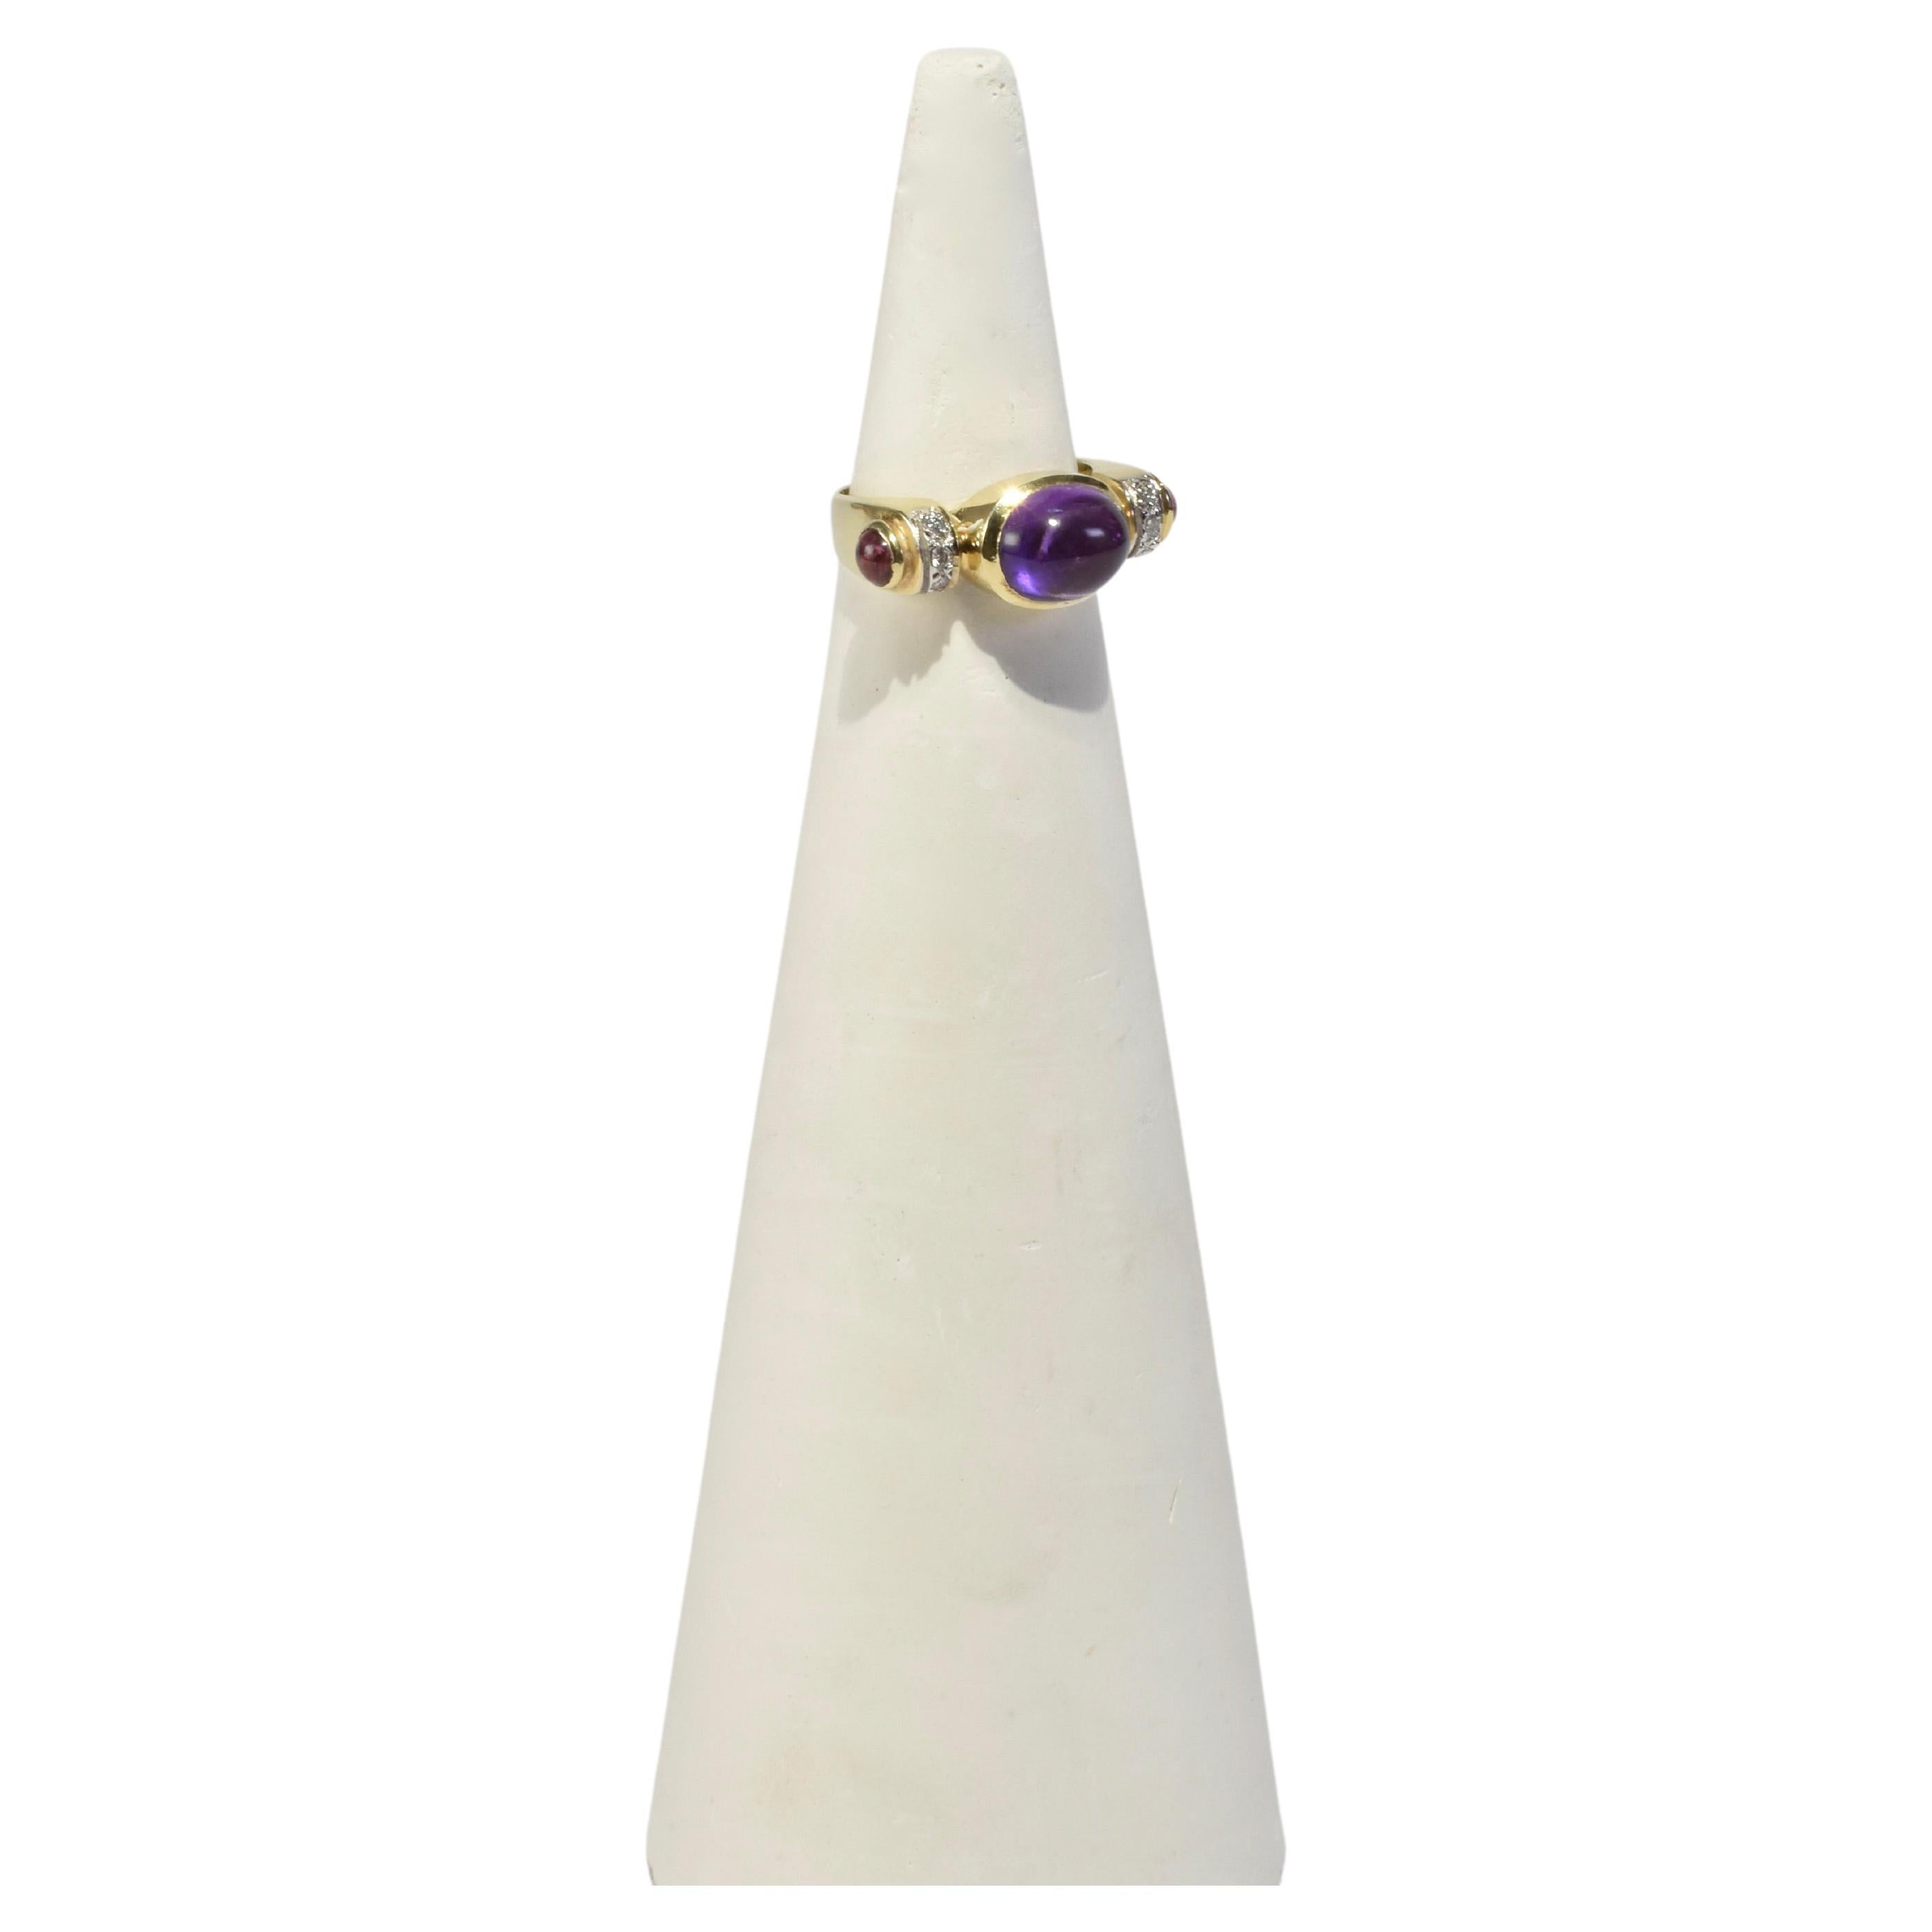 Stunning vintage gold ring with amethyst, ruby, and diamond detail. Stamped 14k.

Material: 14k gold, amethyst, ruby, diamond.